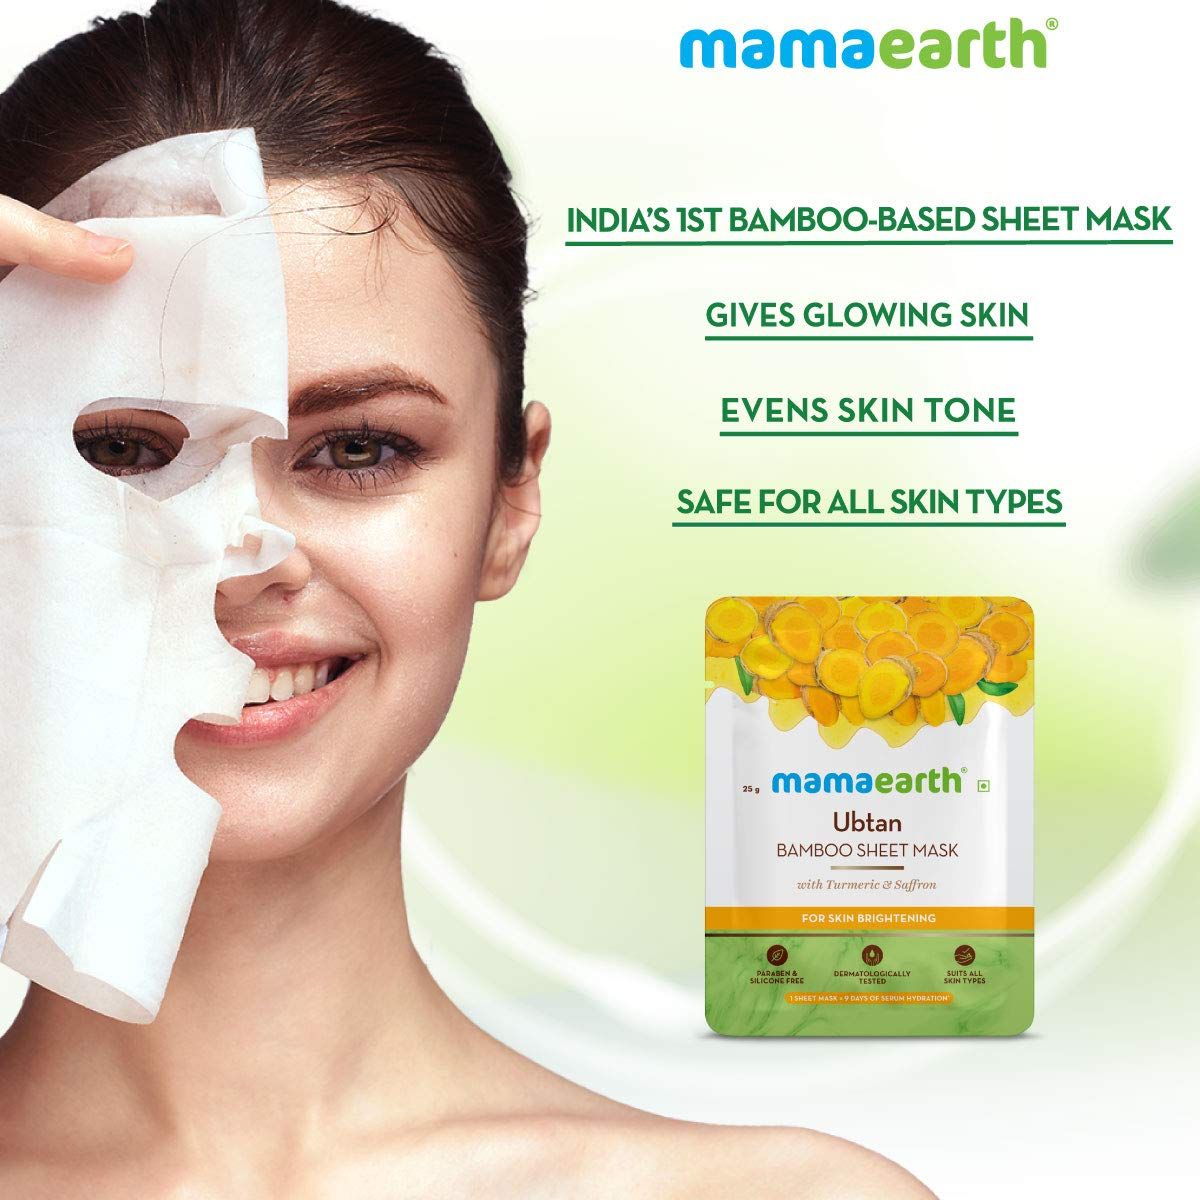 Ubtan Bamboo Sheet Mask with Turmeric and Saffron for Skin Brightening - 25 g